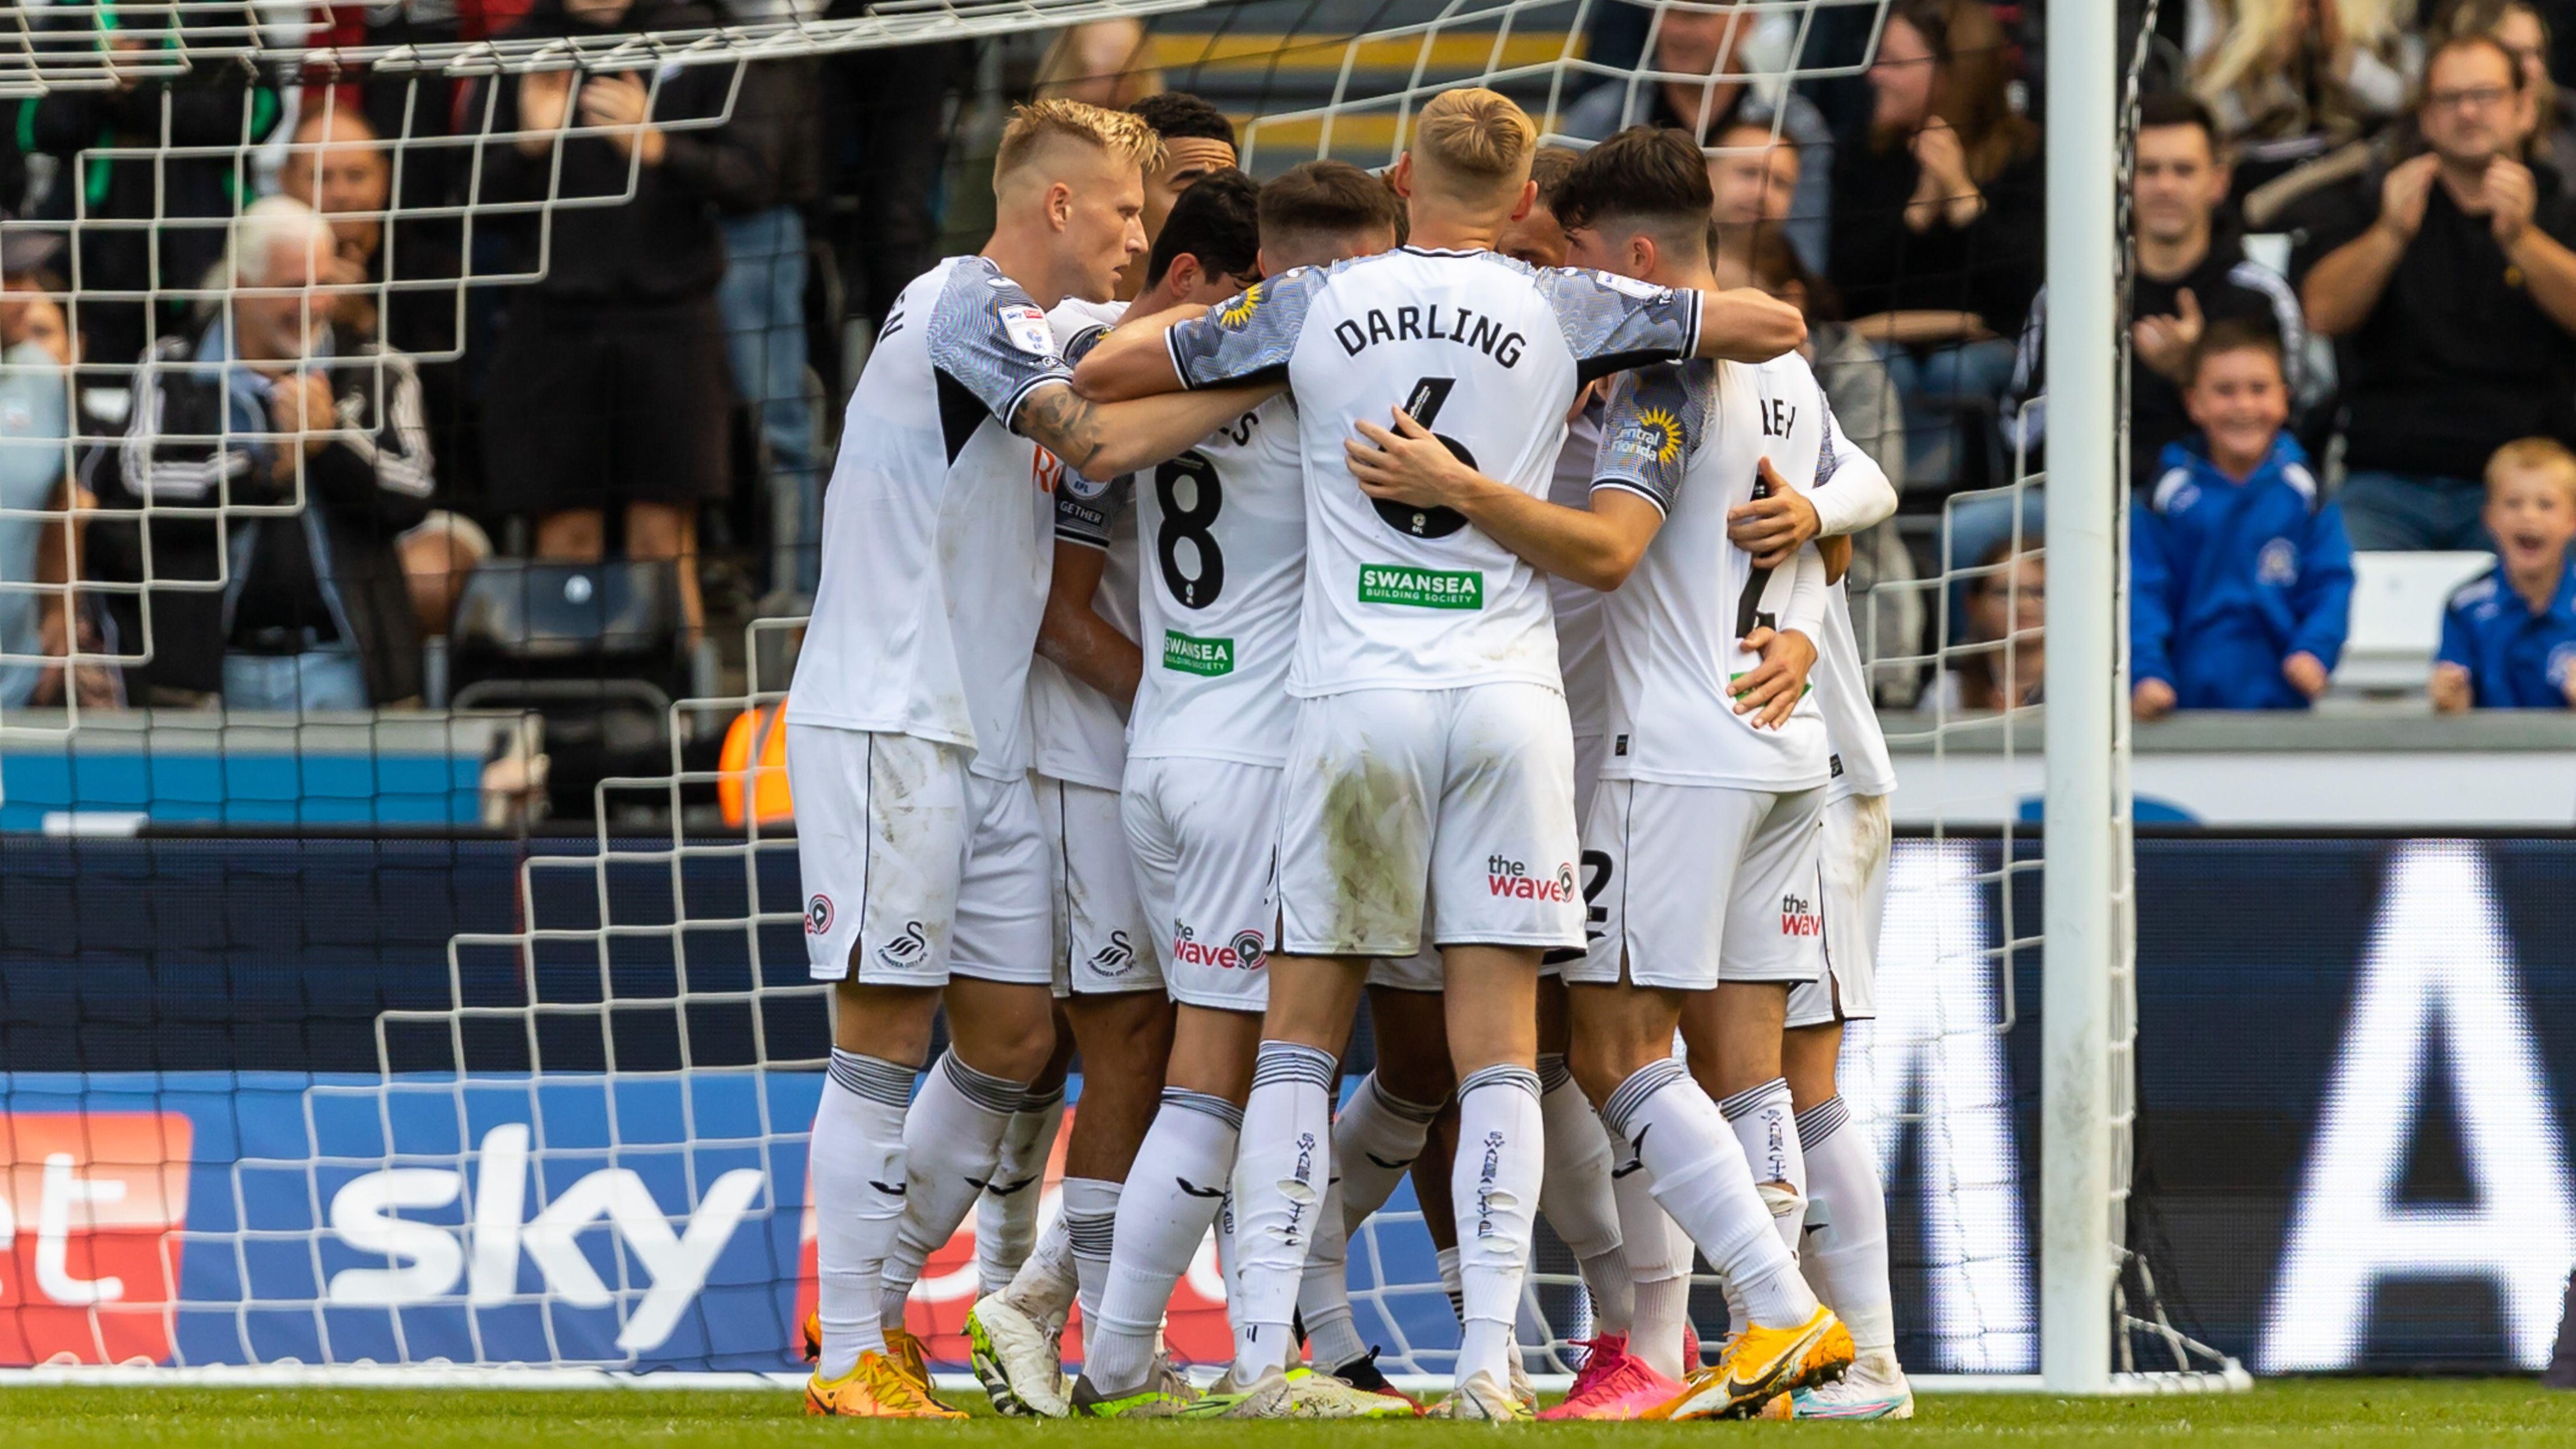 Swansea City team huddle as they celebrate goal against Wednesday